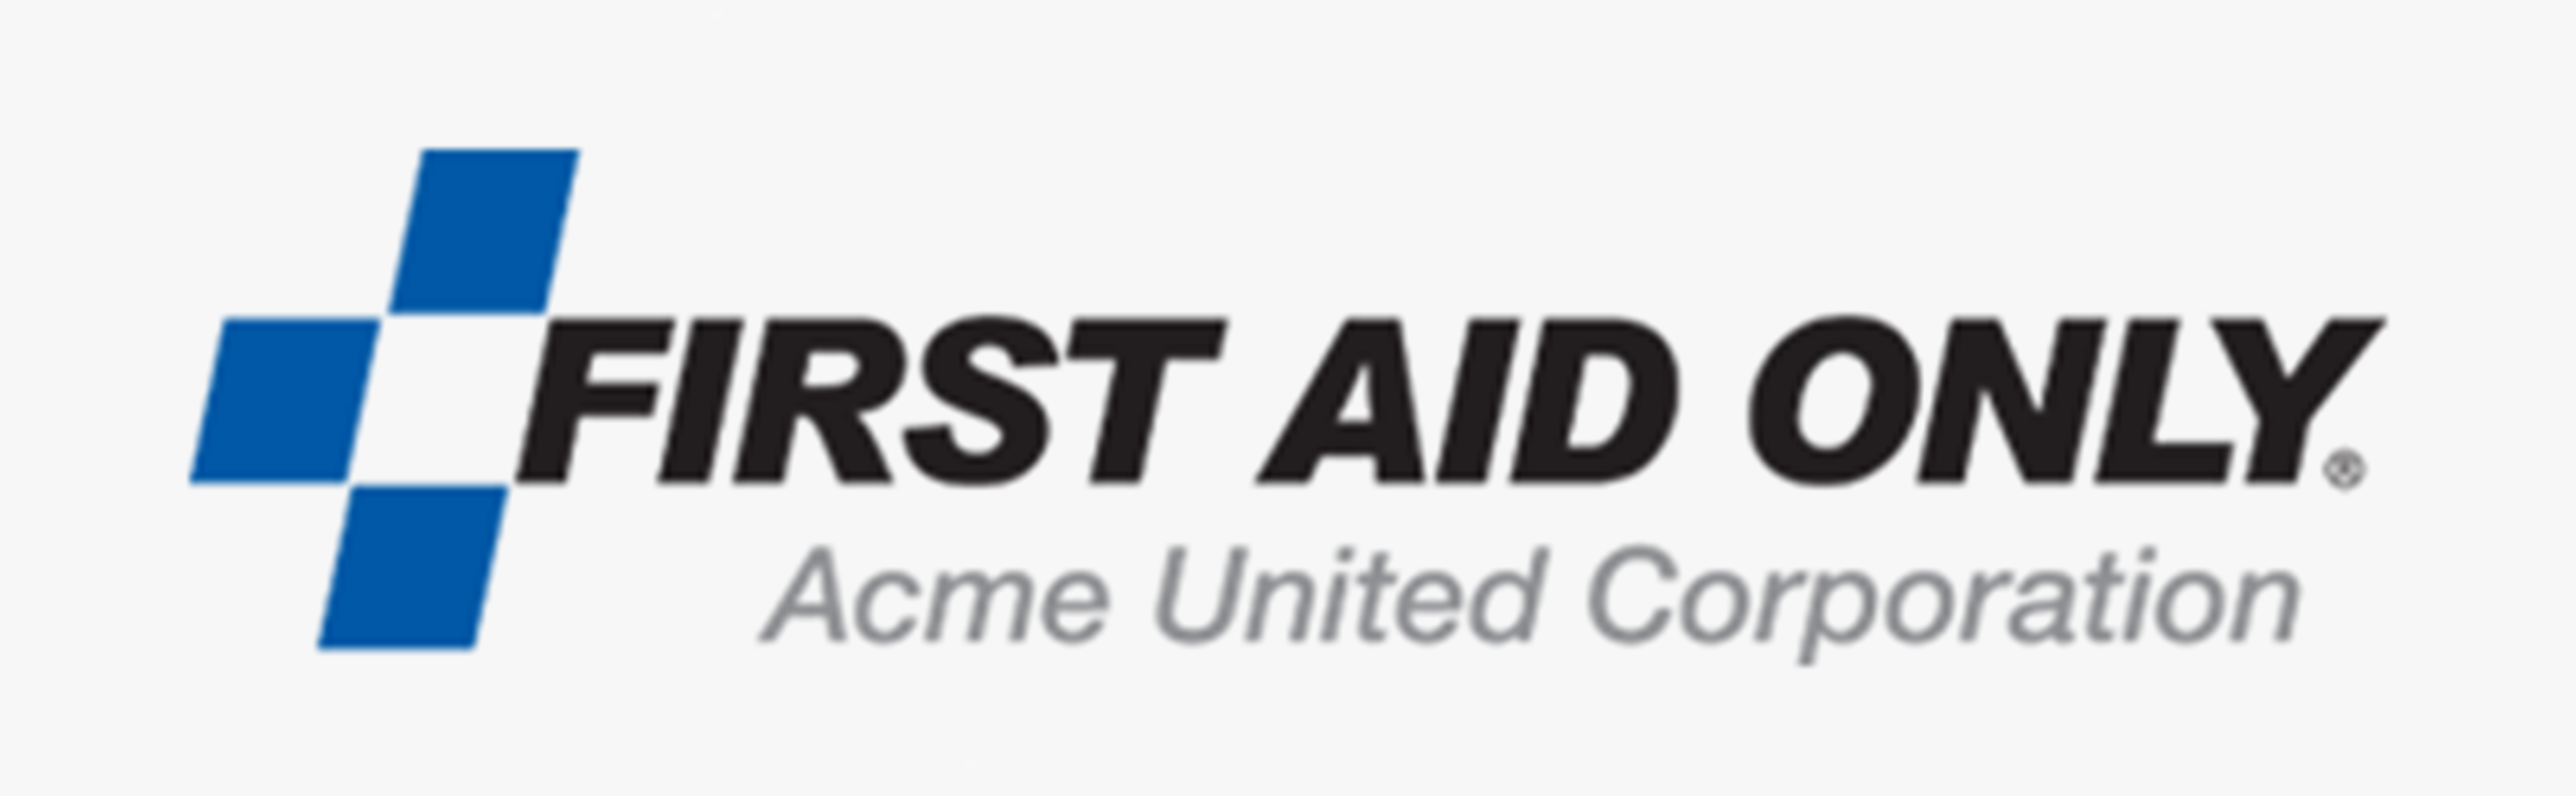 First Aid Only/Acme United Corporation